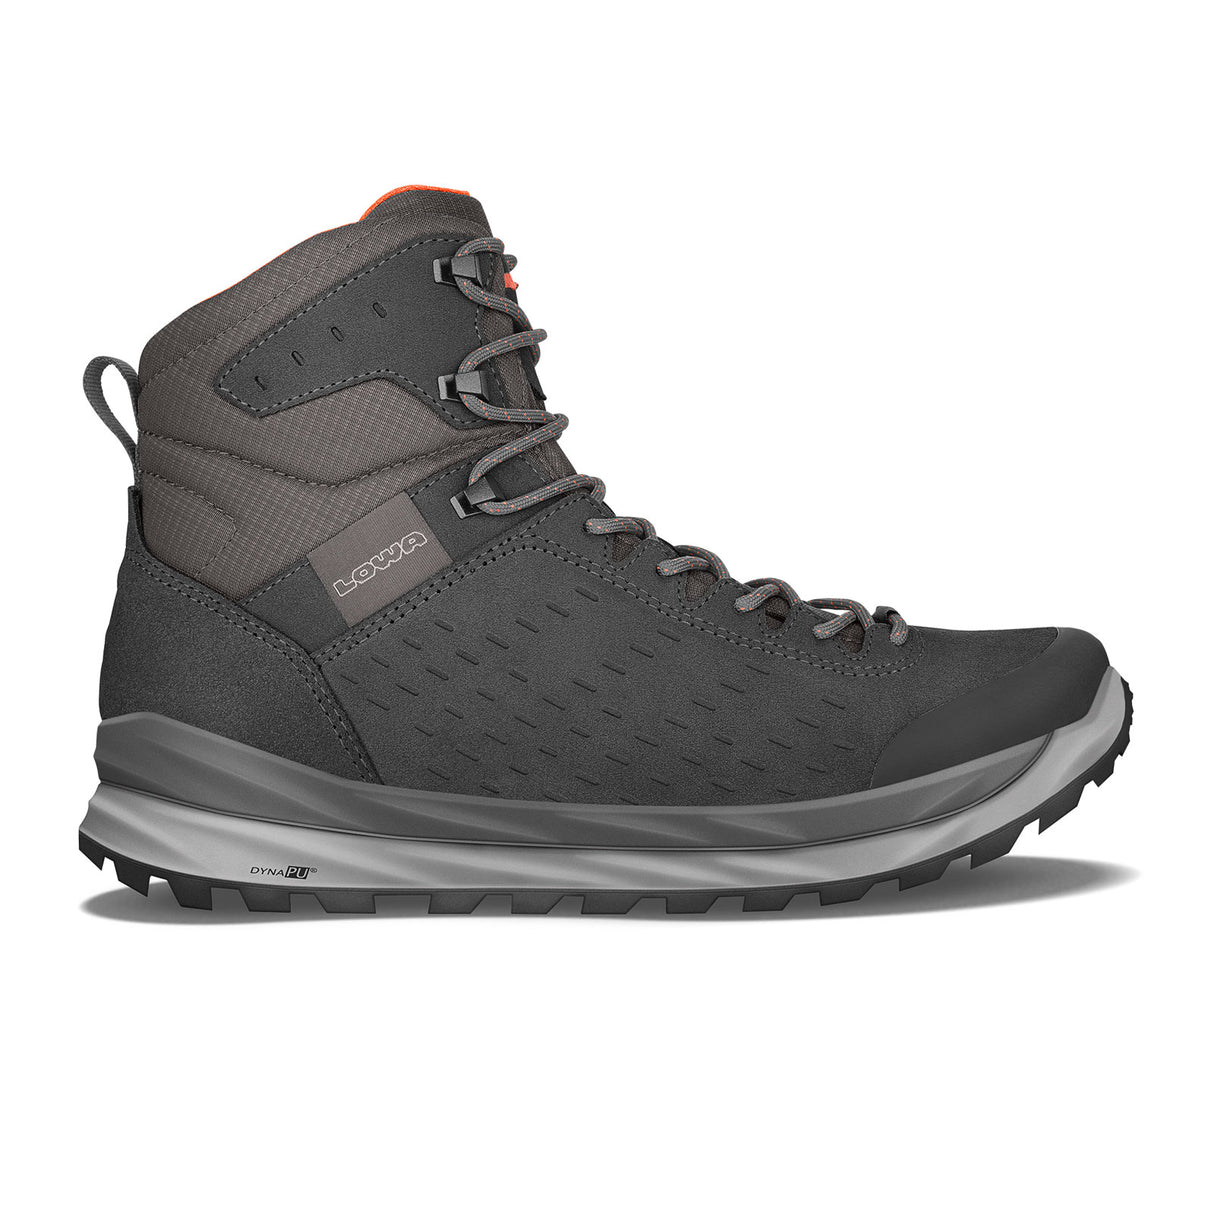 Lowa Malta GTX Mid Hiking Boot (Men) - Anthracite Athletic - Hiking - Mid - The Heel Shoe Fitters